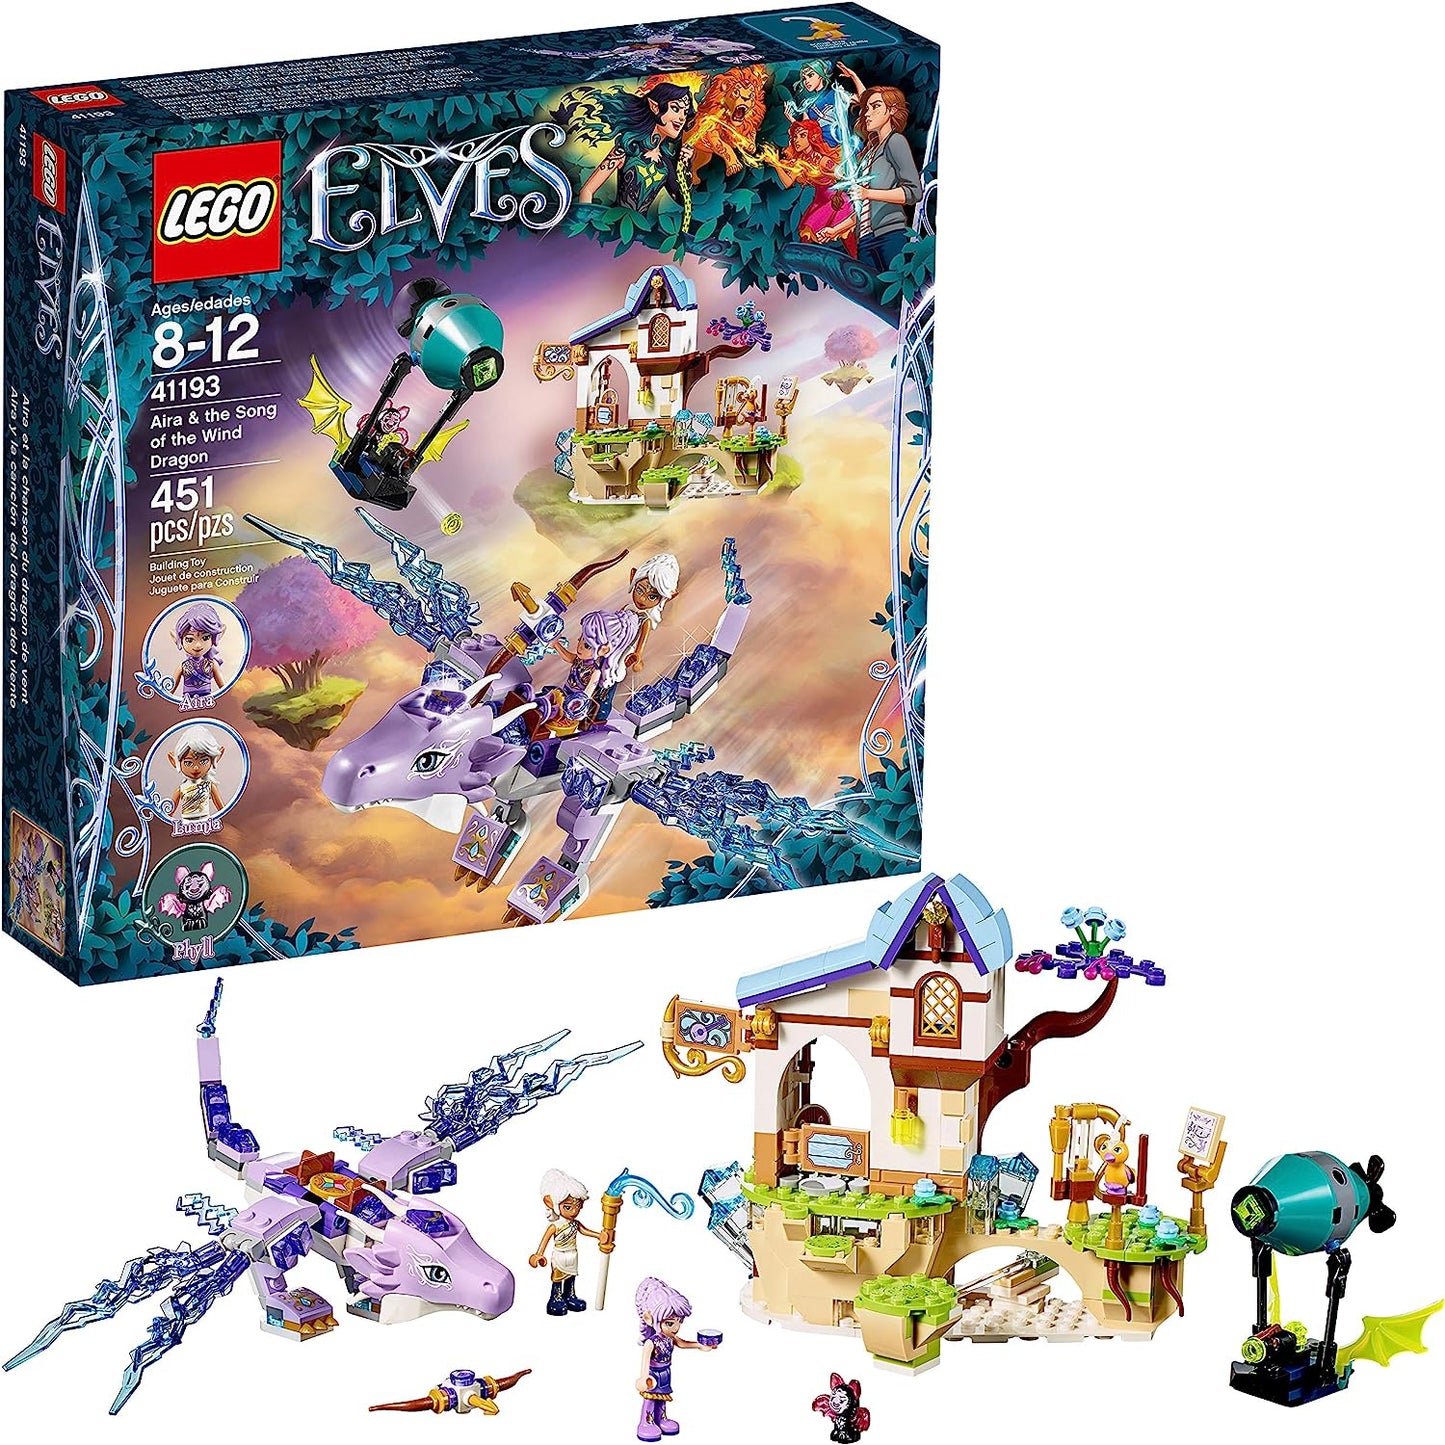 41193 Elves: Aira and The Song of The Wind Dragon - CERTIFIED